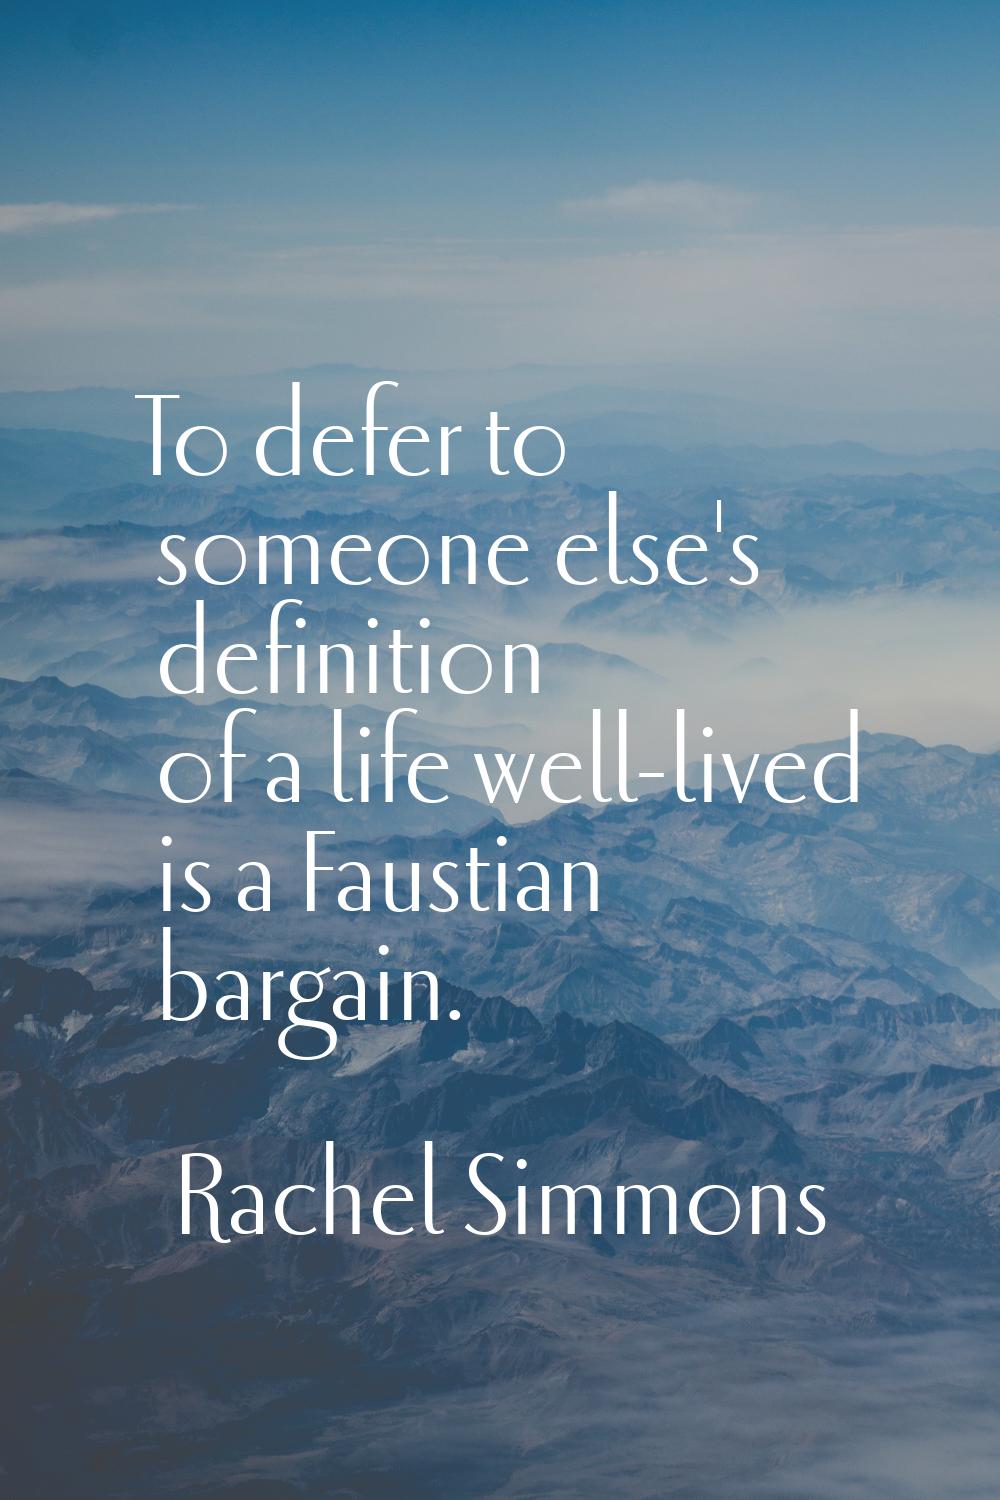 To defer to someone else's definition of a life well-lived is a Faustian bargain.